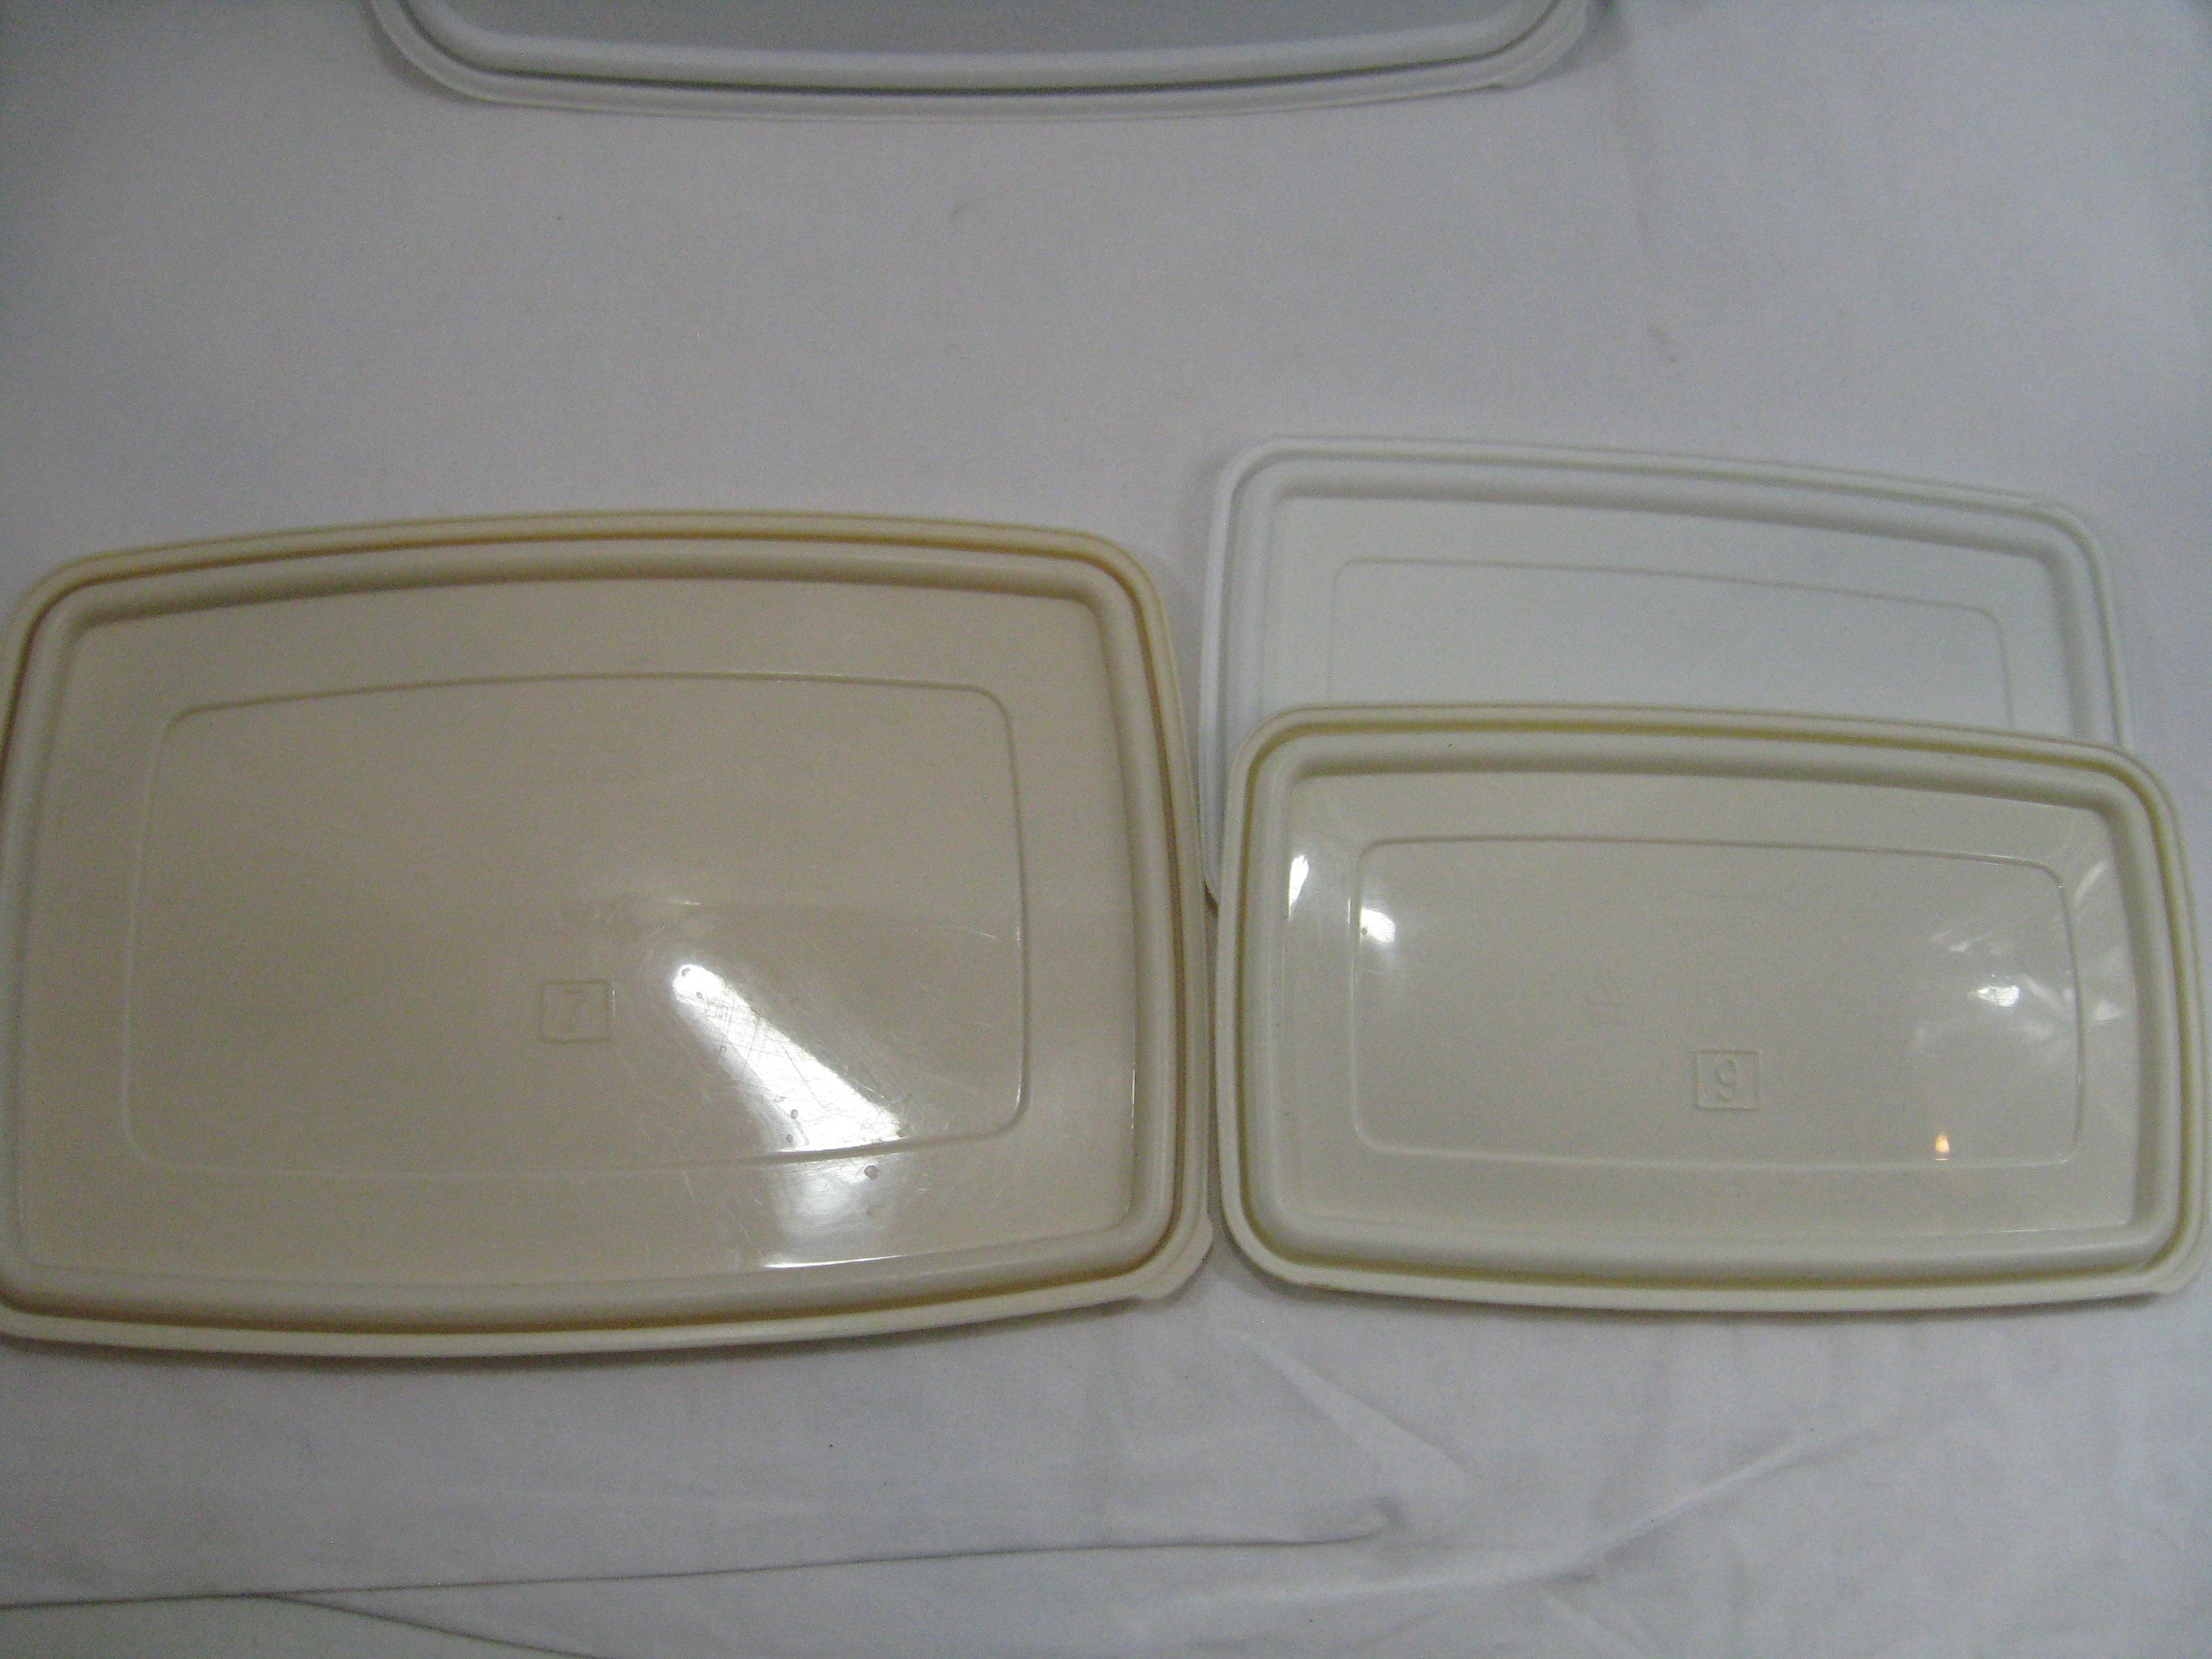 Rubbermaid Servin' Saver Plastic Containers, Canisters, Food Storage, 1980s  choose With or Without Lid 